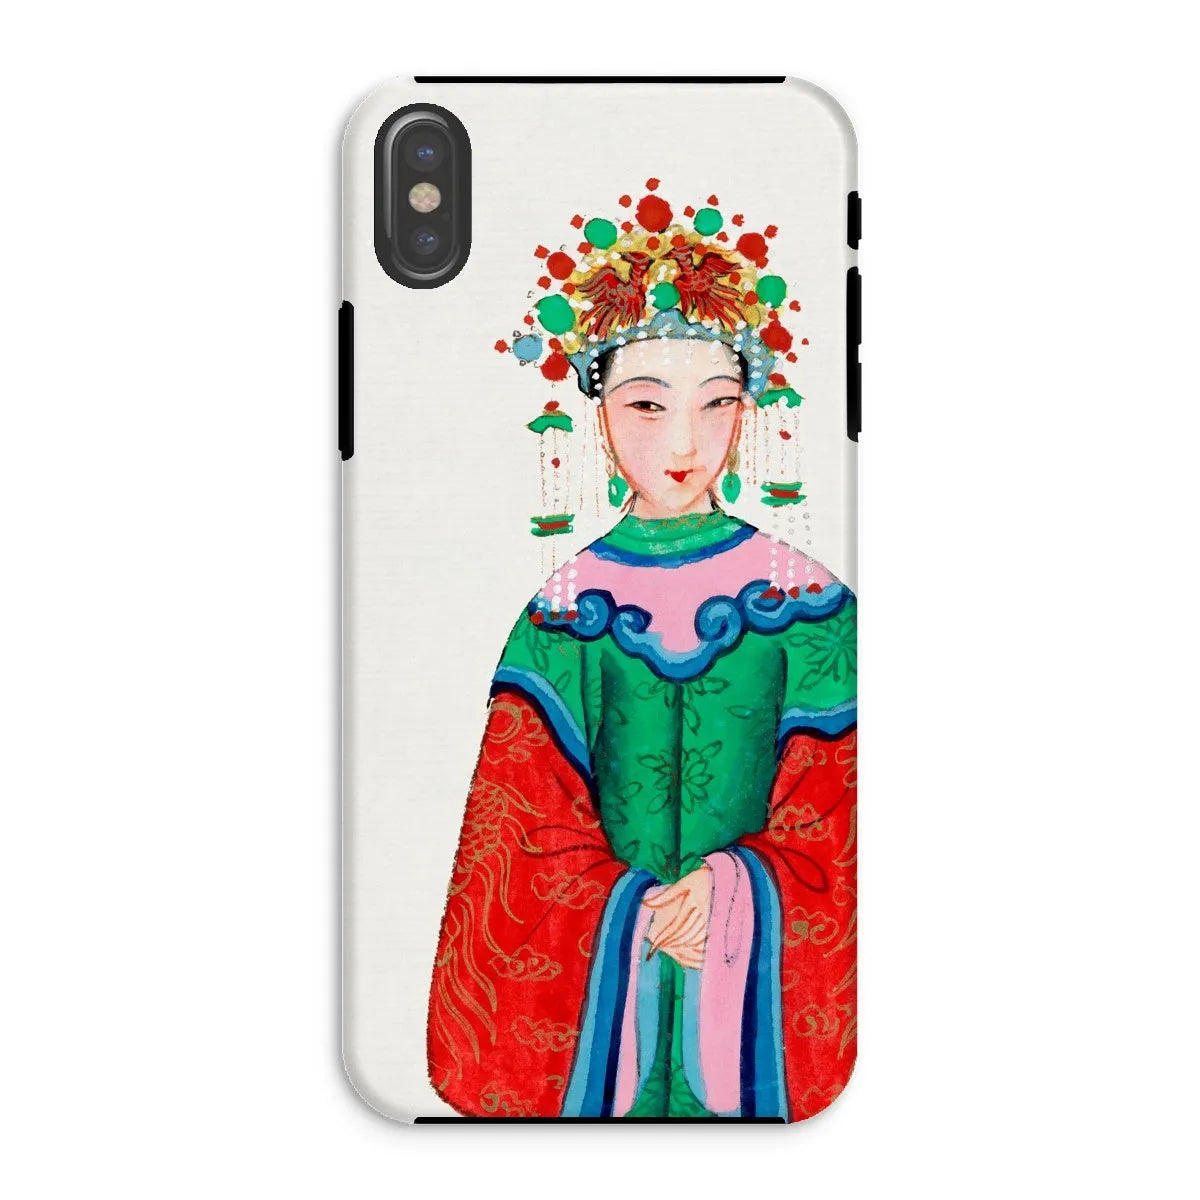 Imperial Princess - Chinese Aesthetic Painting Phone Case - Iphone Xs / Matte - Mobile Phone Cases - Aesthetic Art